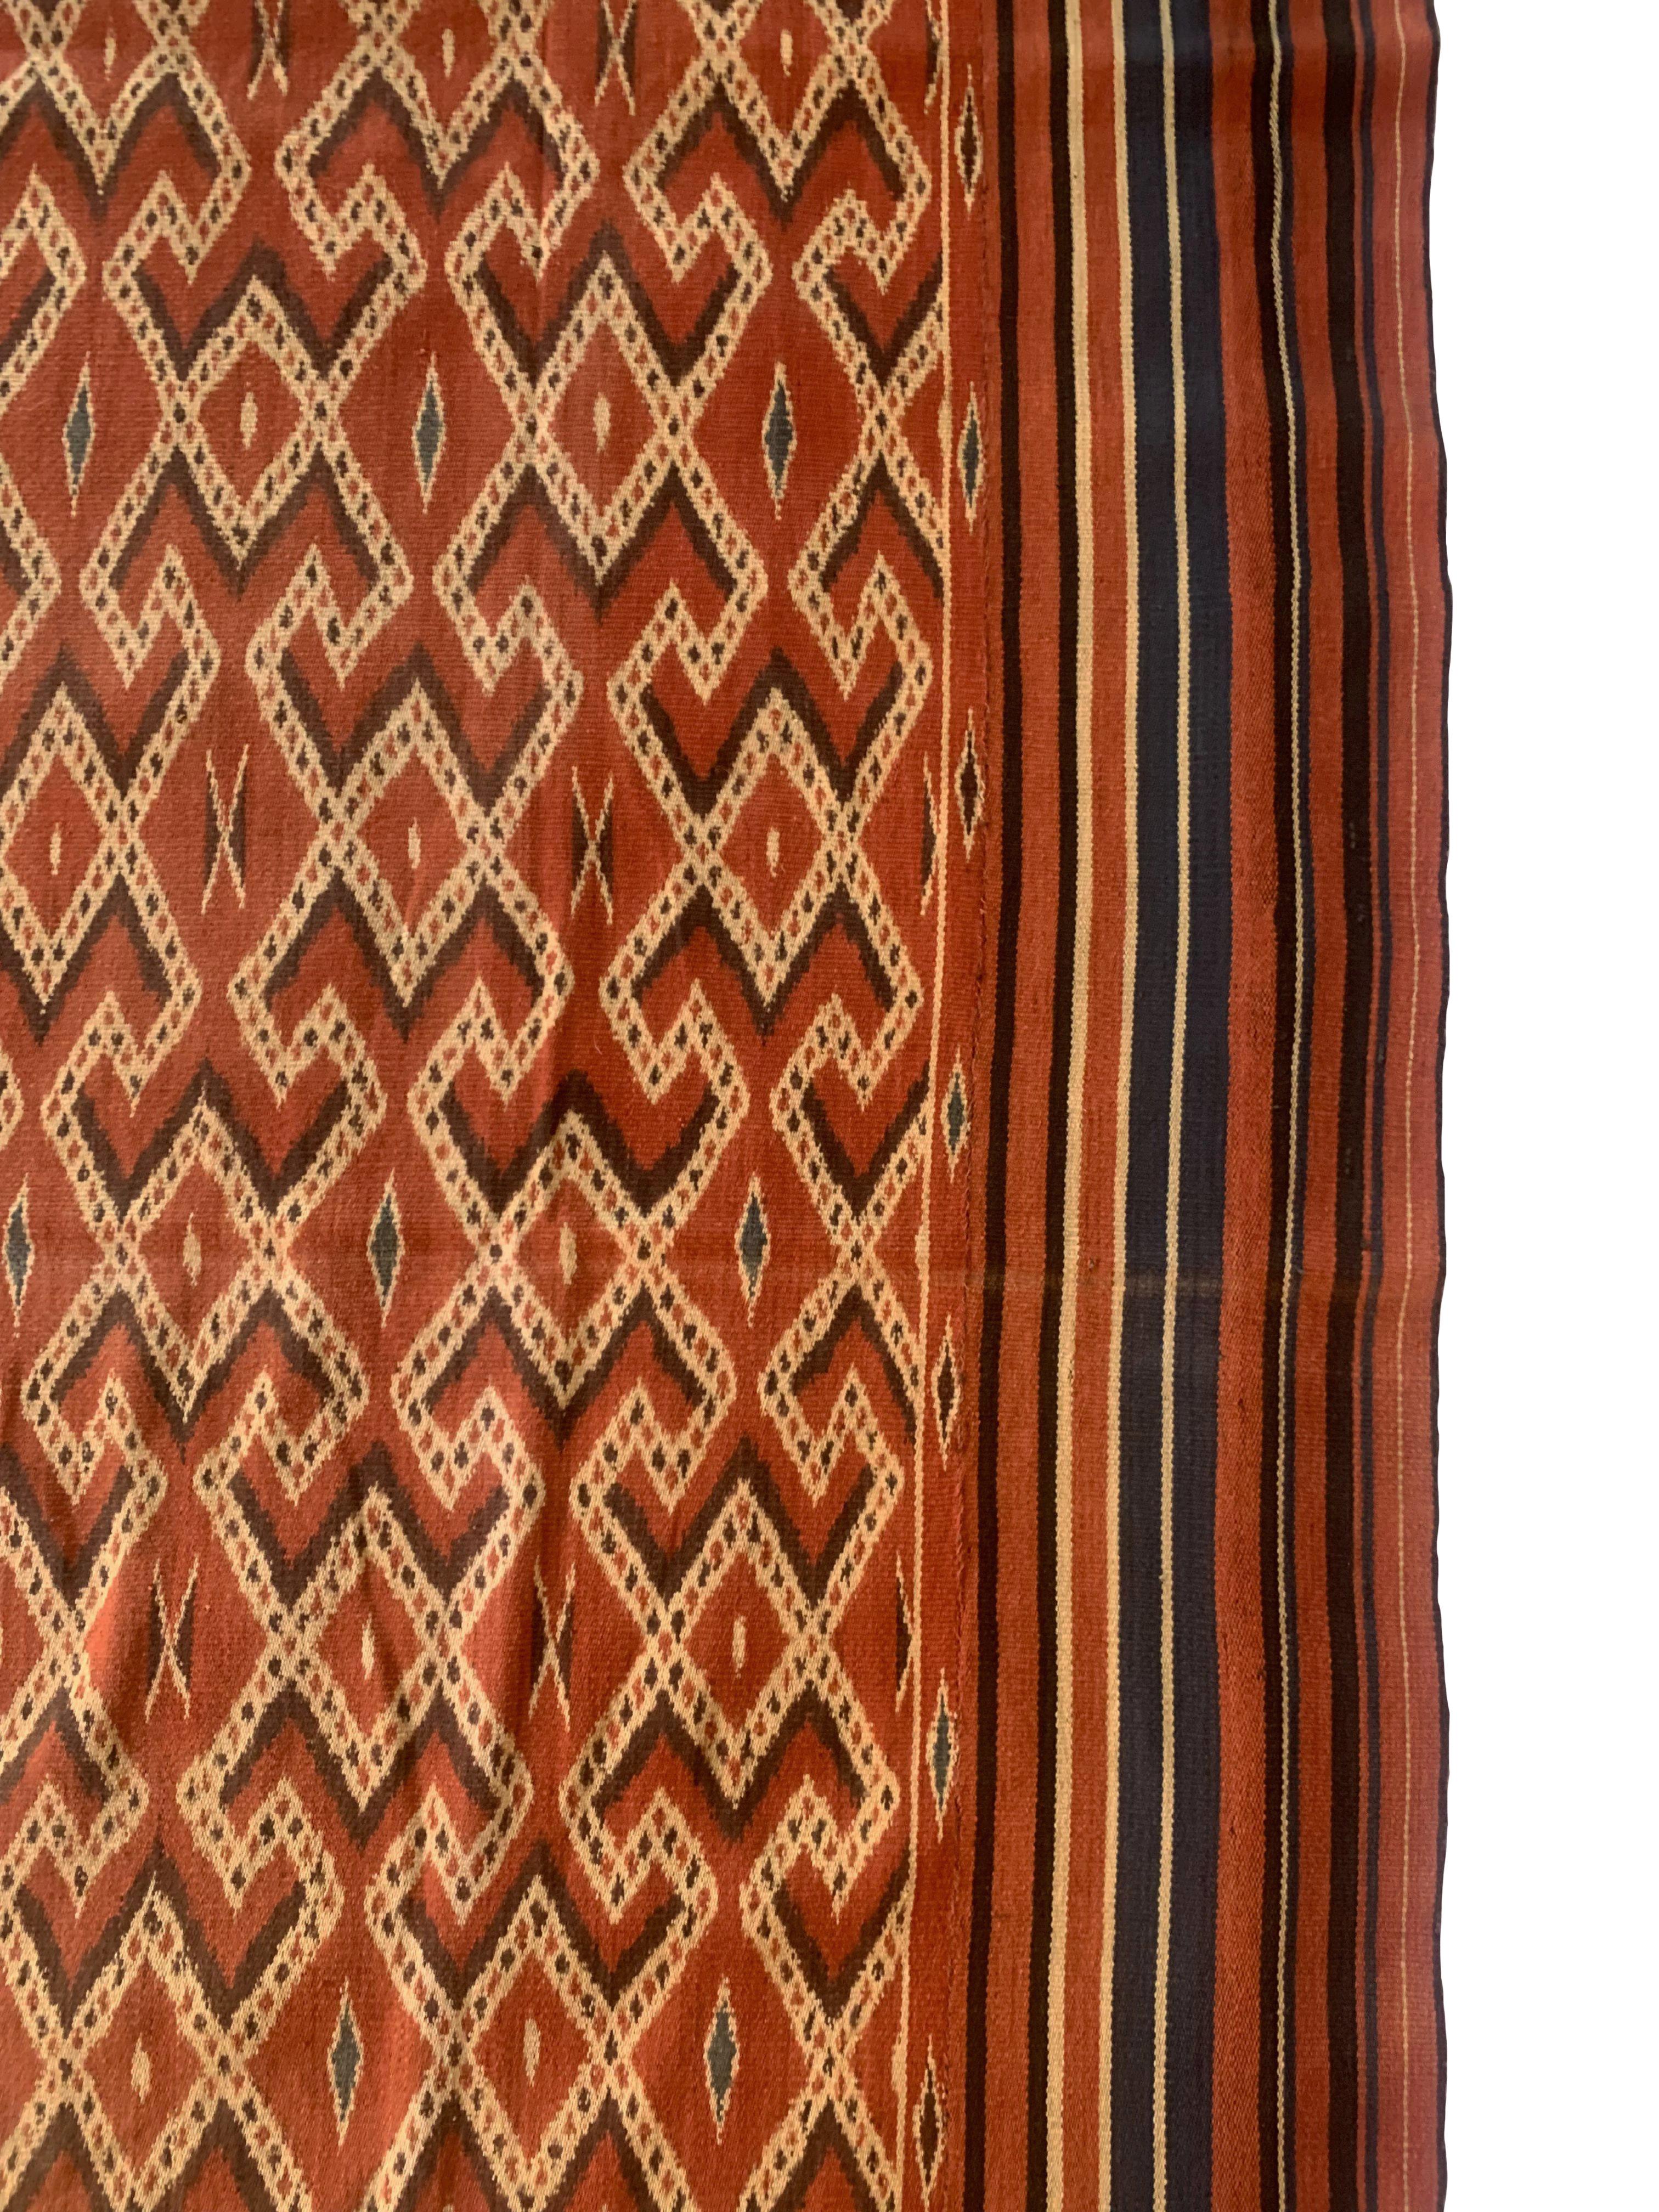 Indonesian Ikat Textile from Toraja Tribe of Sulawesi with Stunning Tribal Motifs C. 1950 For Sale